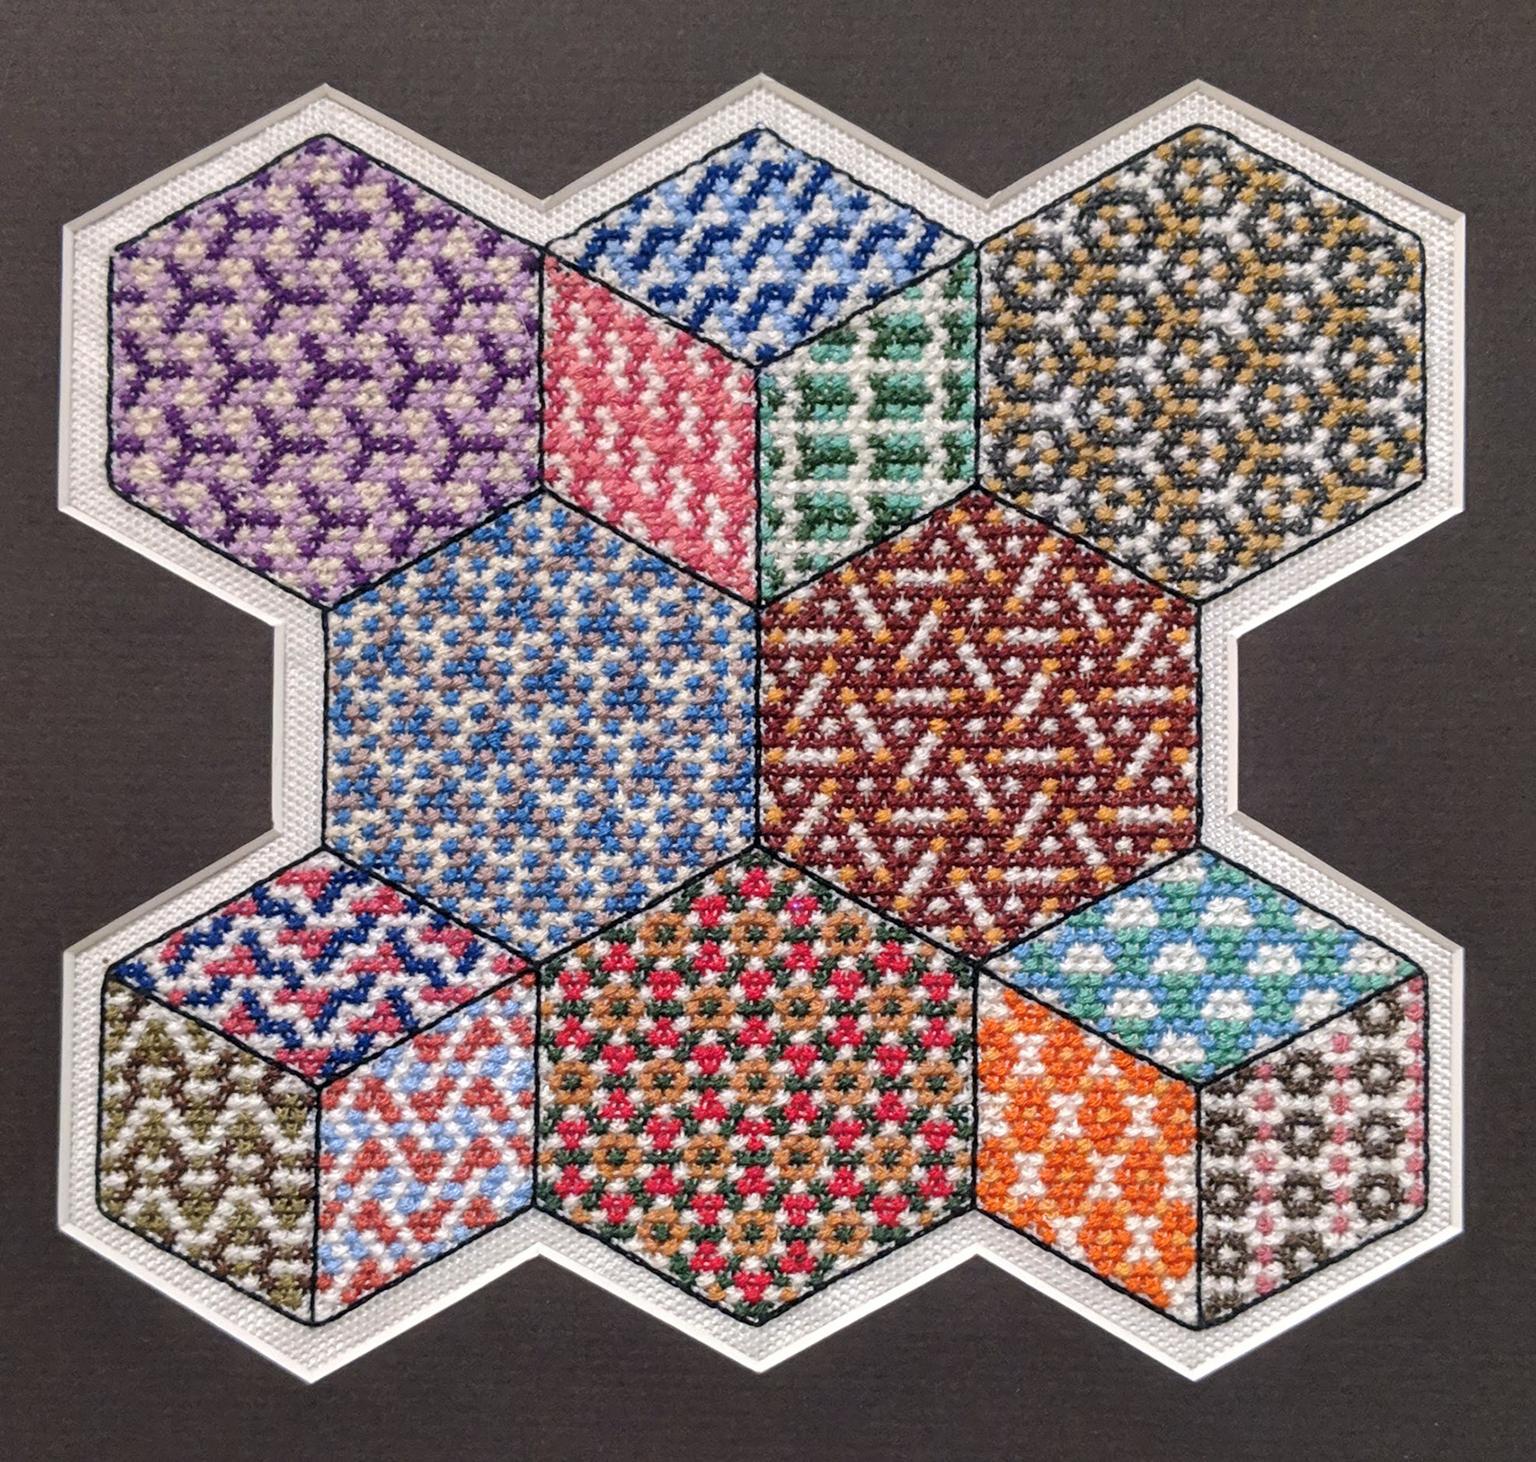 Image for entry 'A (More) Complete Cross Stitch Symmetry Sampler'